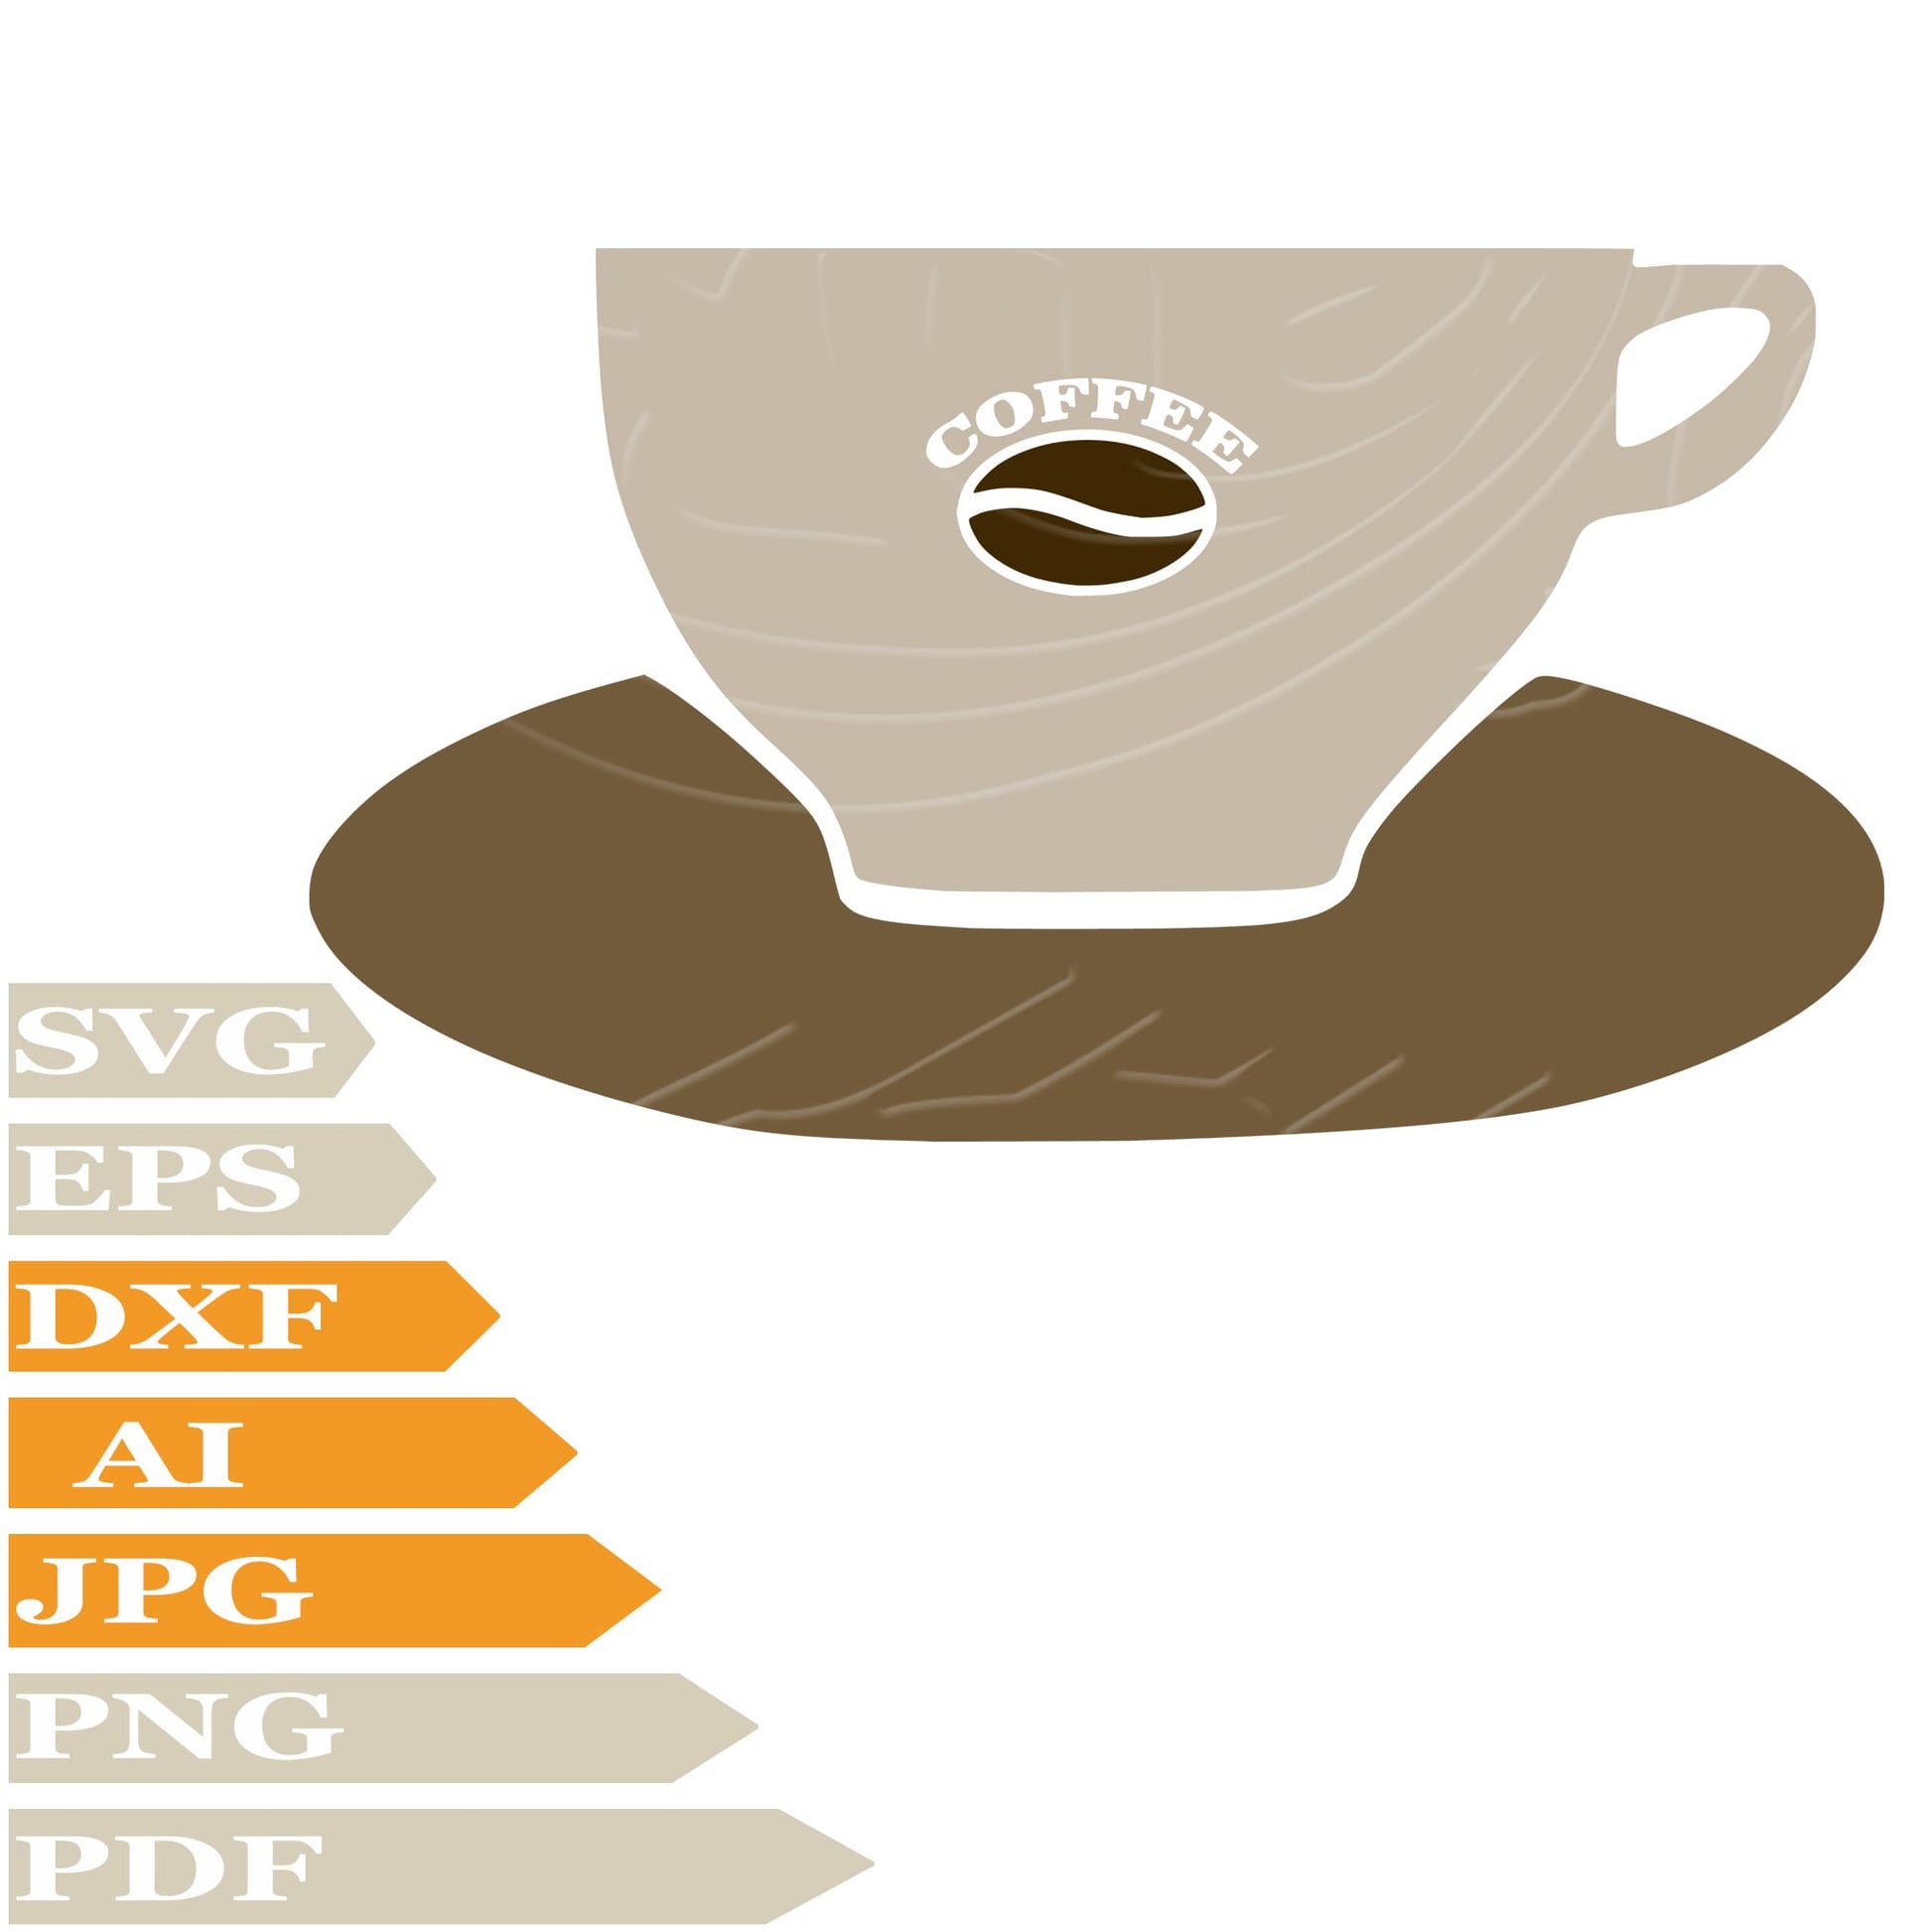 Coffee SVG, Coffe Cup SVG Design, Coffee Beans Vector Graphics, Coffe Cup For Cricut, For Tattoo, Clip Art, Cut File, T-Shirts, Silhouette, All Available